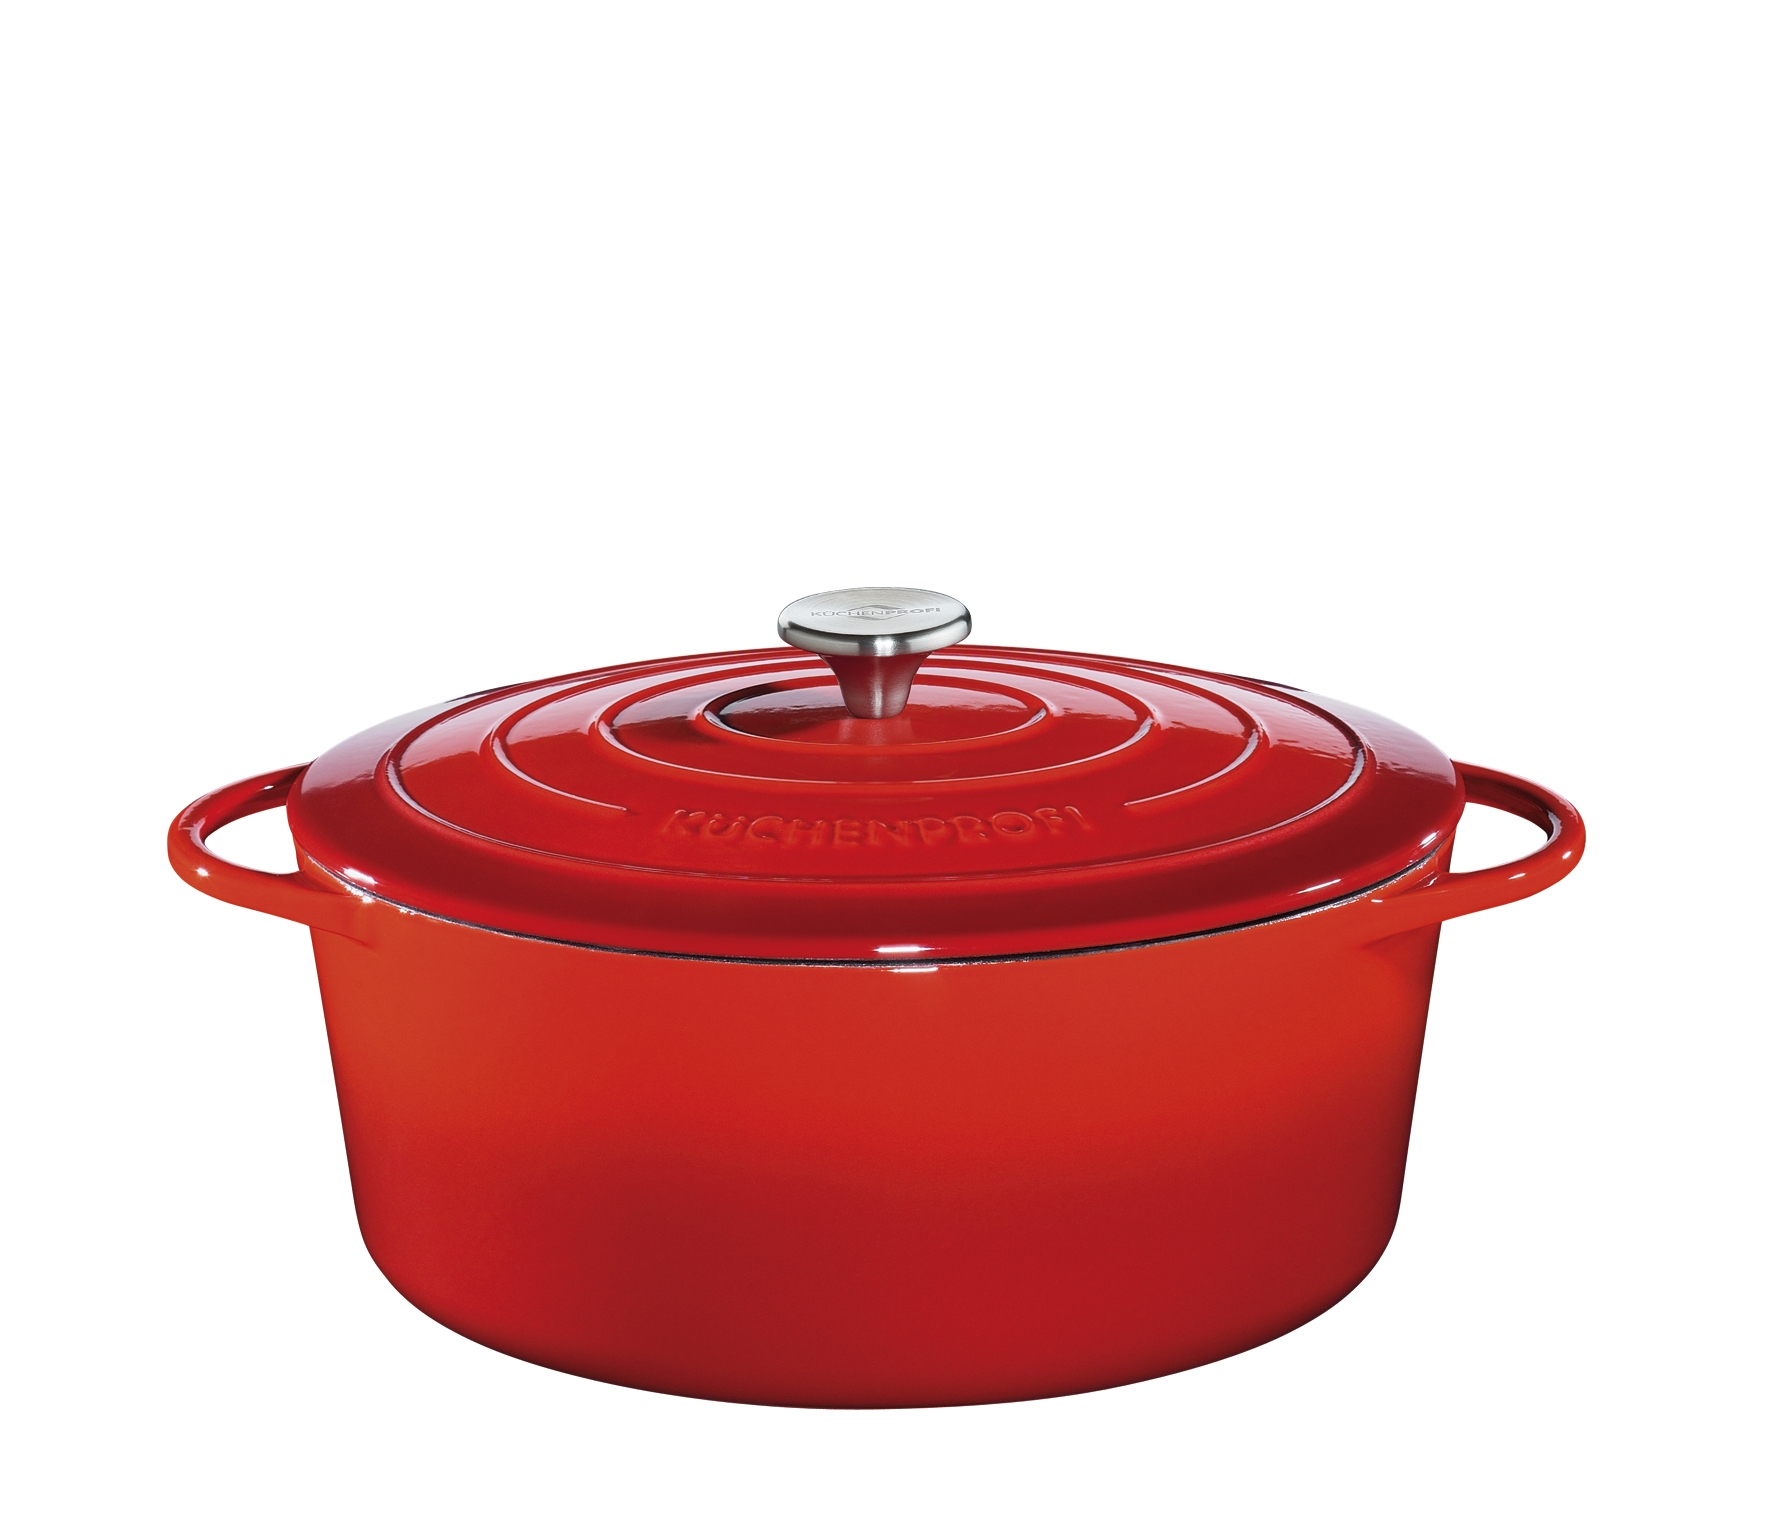 Bratentopf oval mit Gussdeckel PROVENCE 35 rot emailliertes Gusseisen + energiesparend, 8,9l 